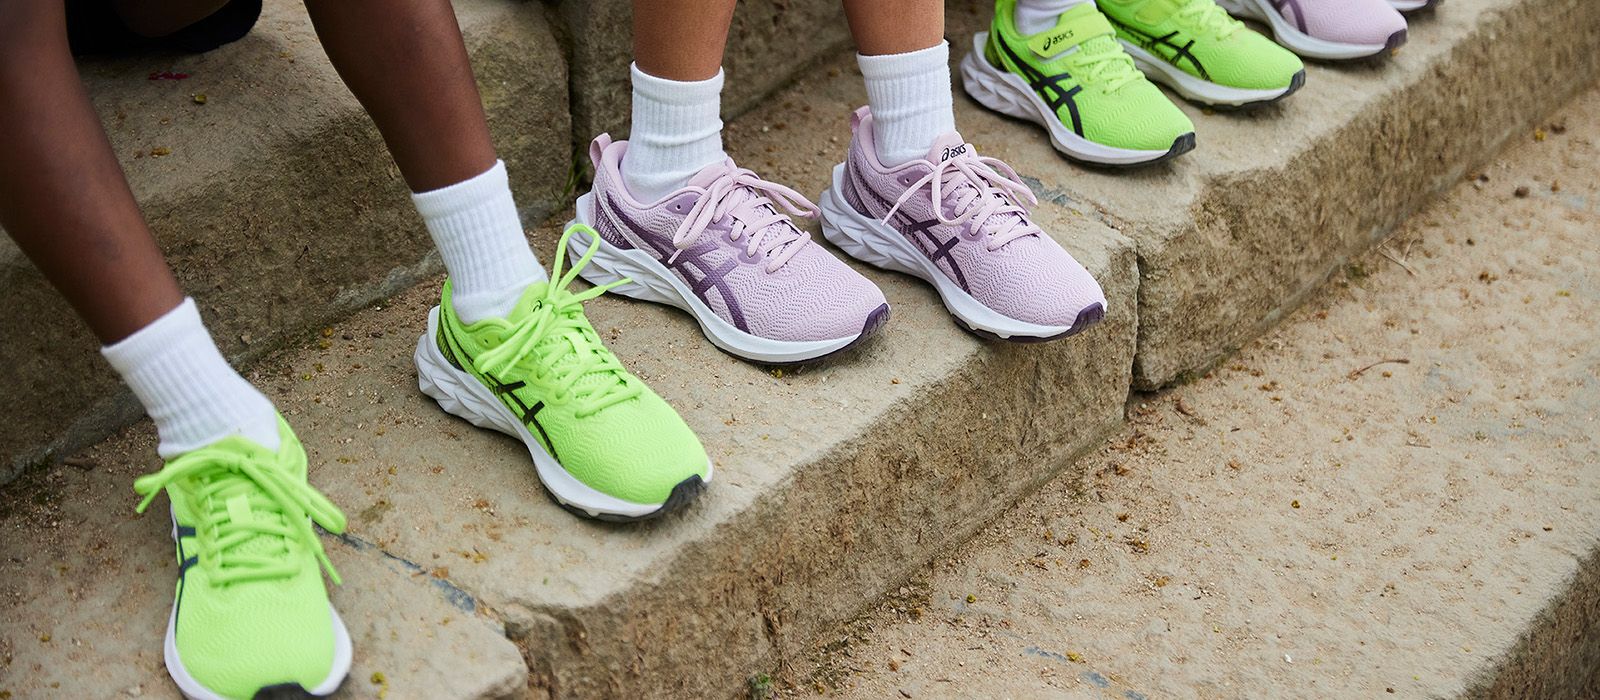 Find the right shoe size for your kids' feet | ASICS UK